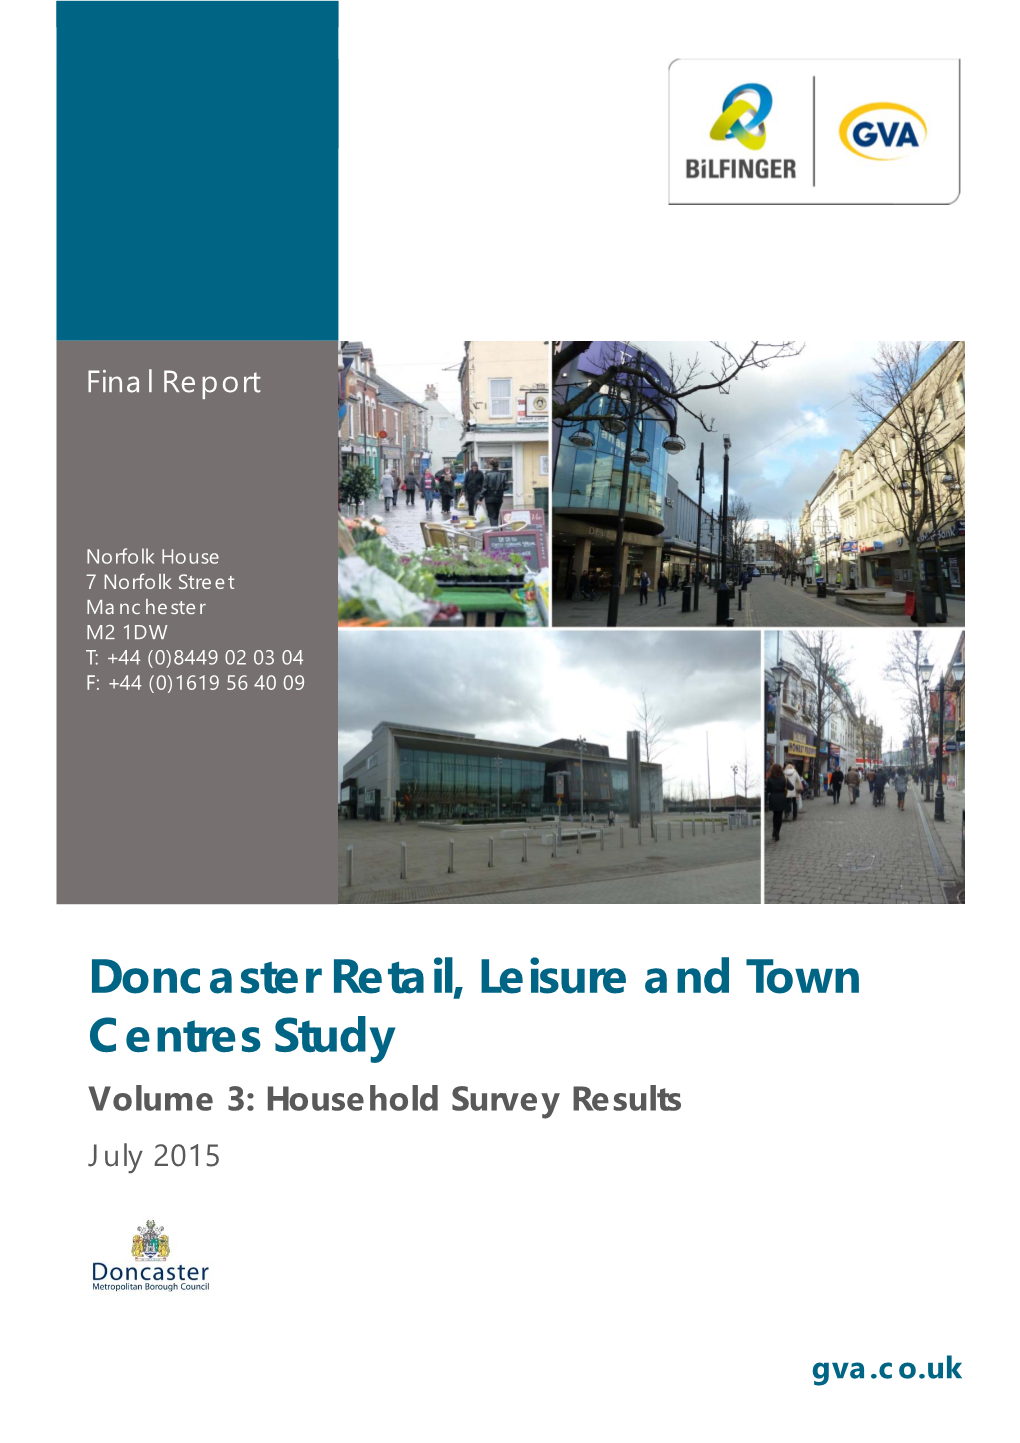 Doncaster Retail, Leisure and Town Centres Study Volume 3: Household Survey Results July 2015